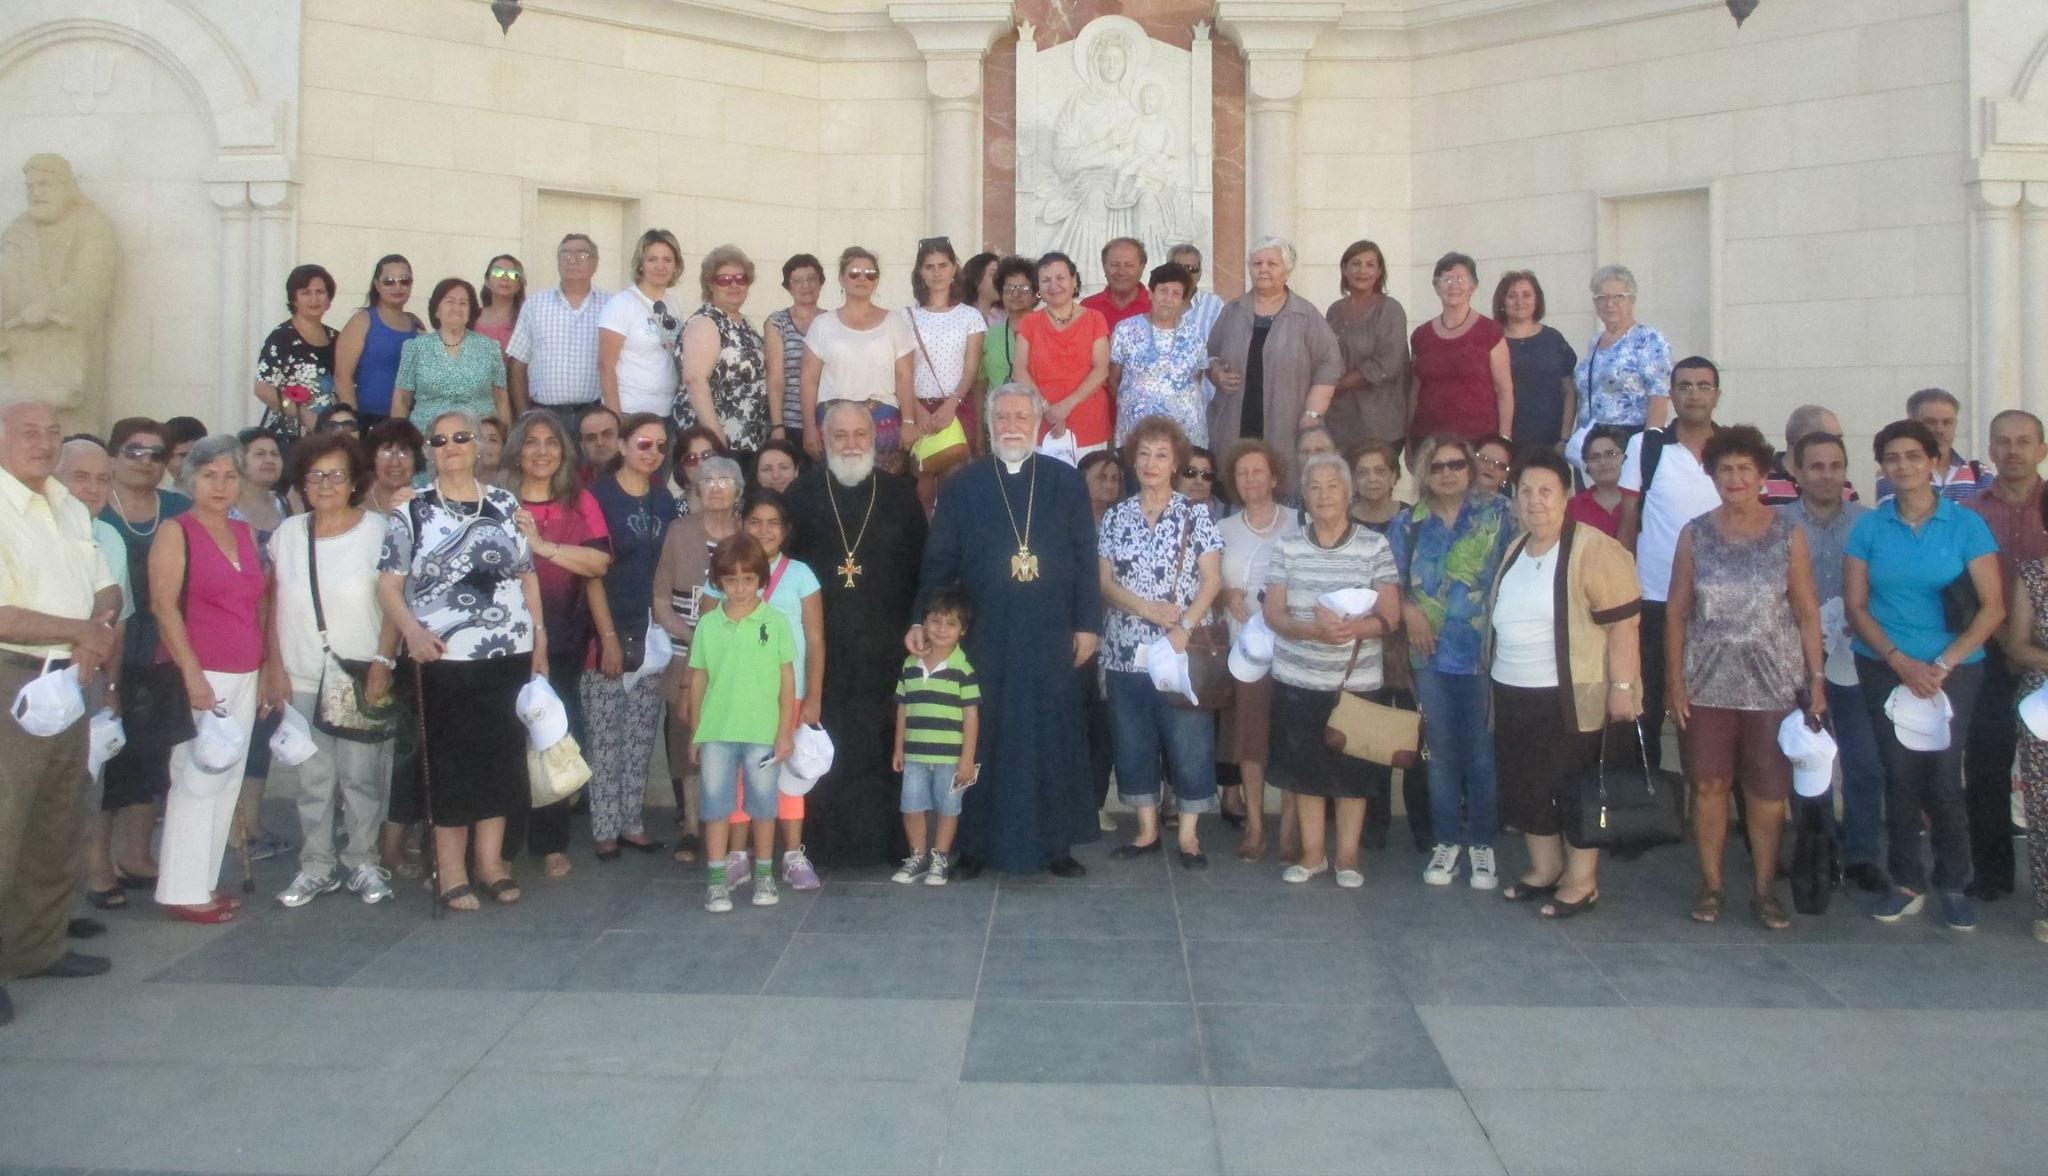 St. Mary’s Monastery in Bikfaya has become a destination for pilgrims